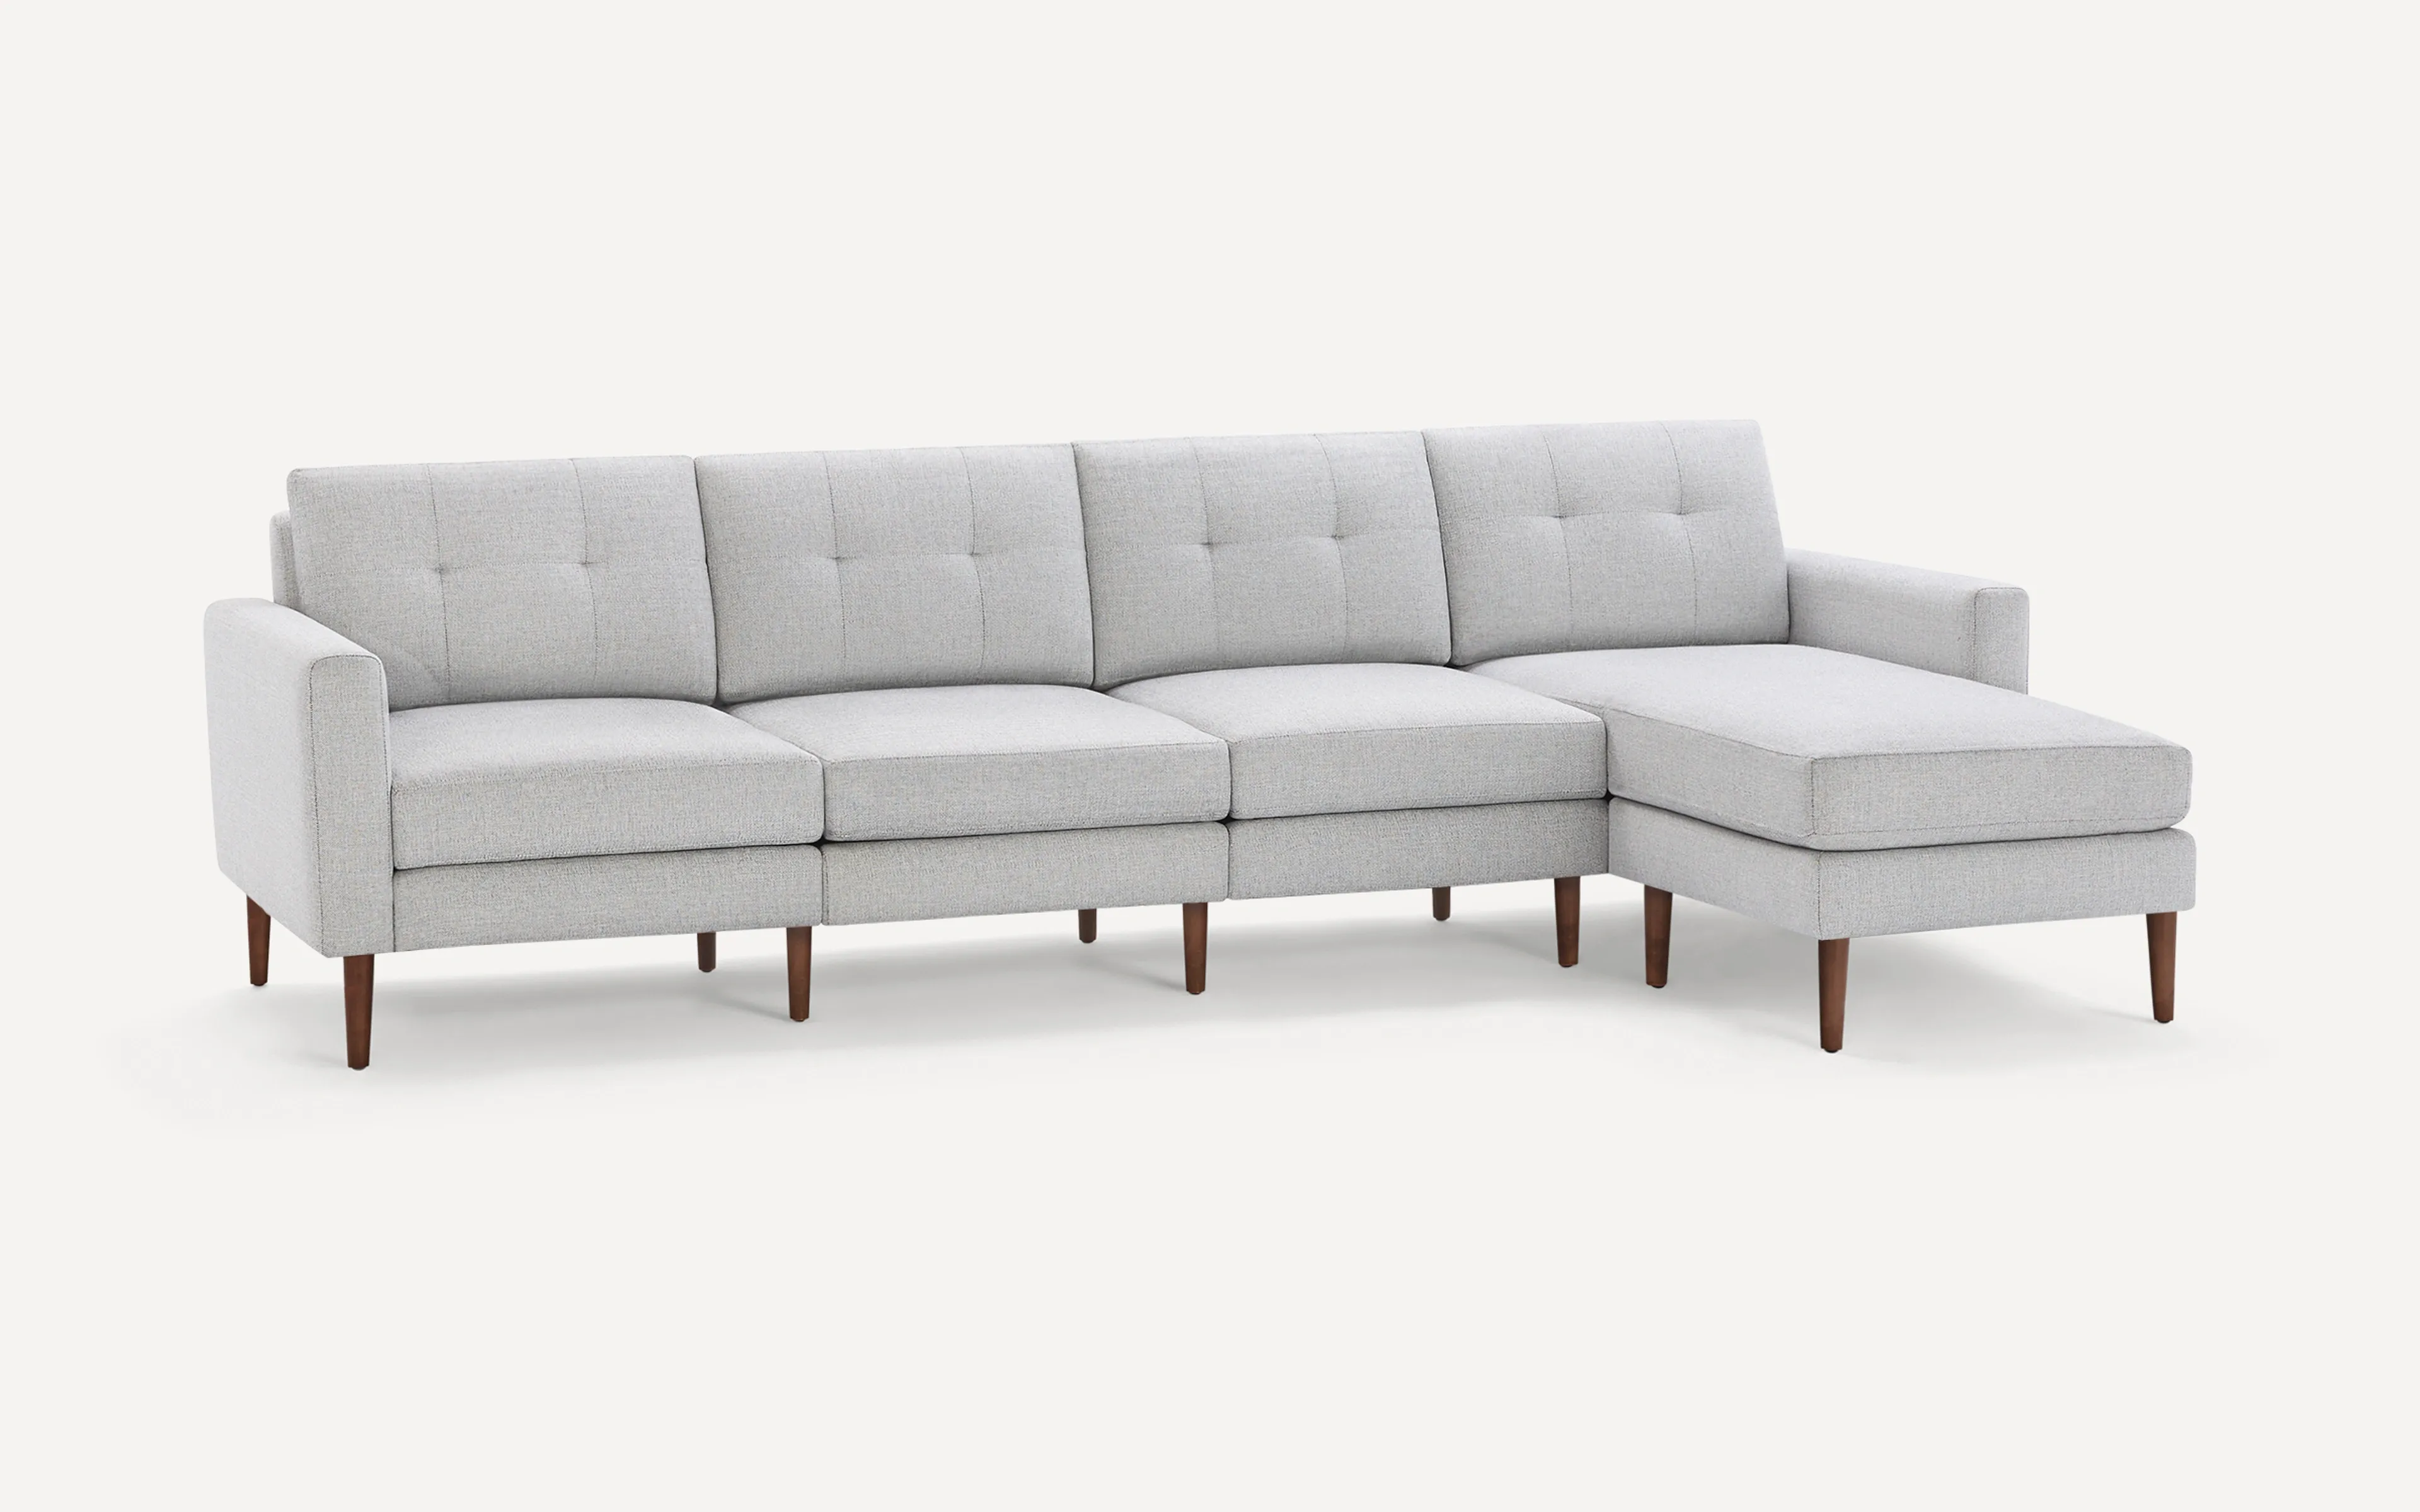 Original Nomad Chaise King Sofa in Crushed Gravel Fabric